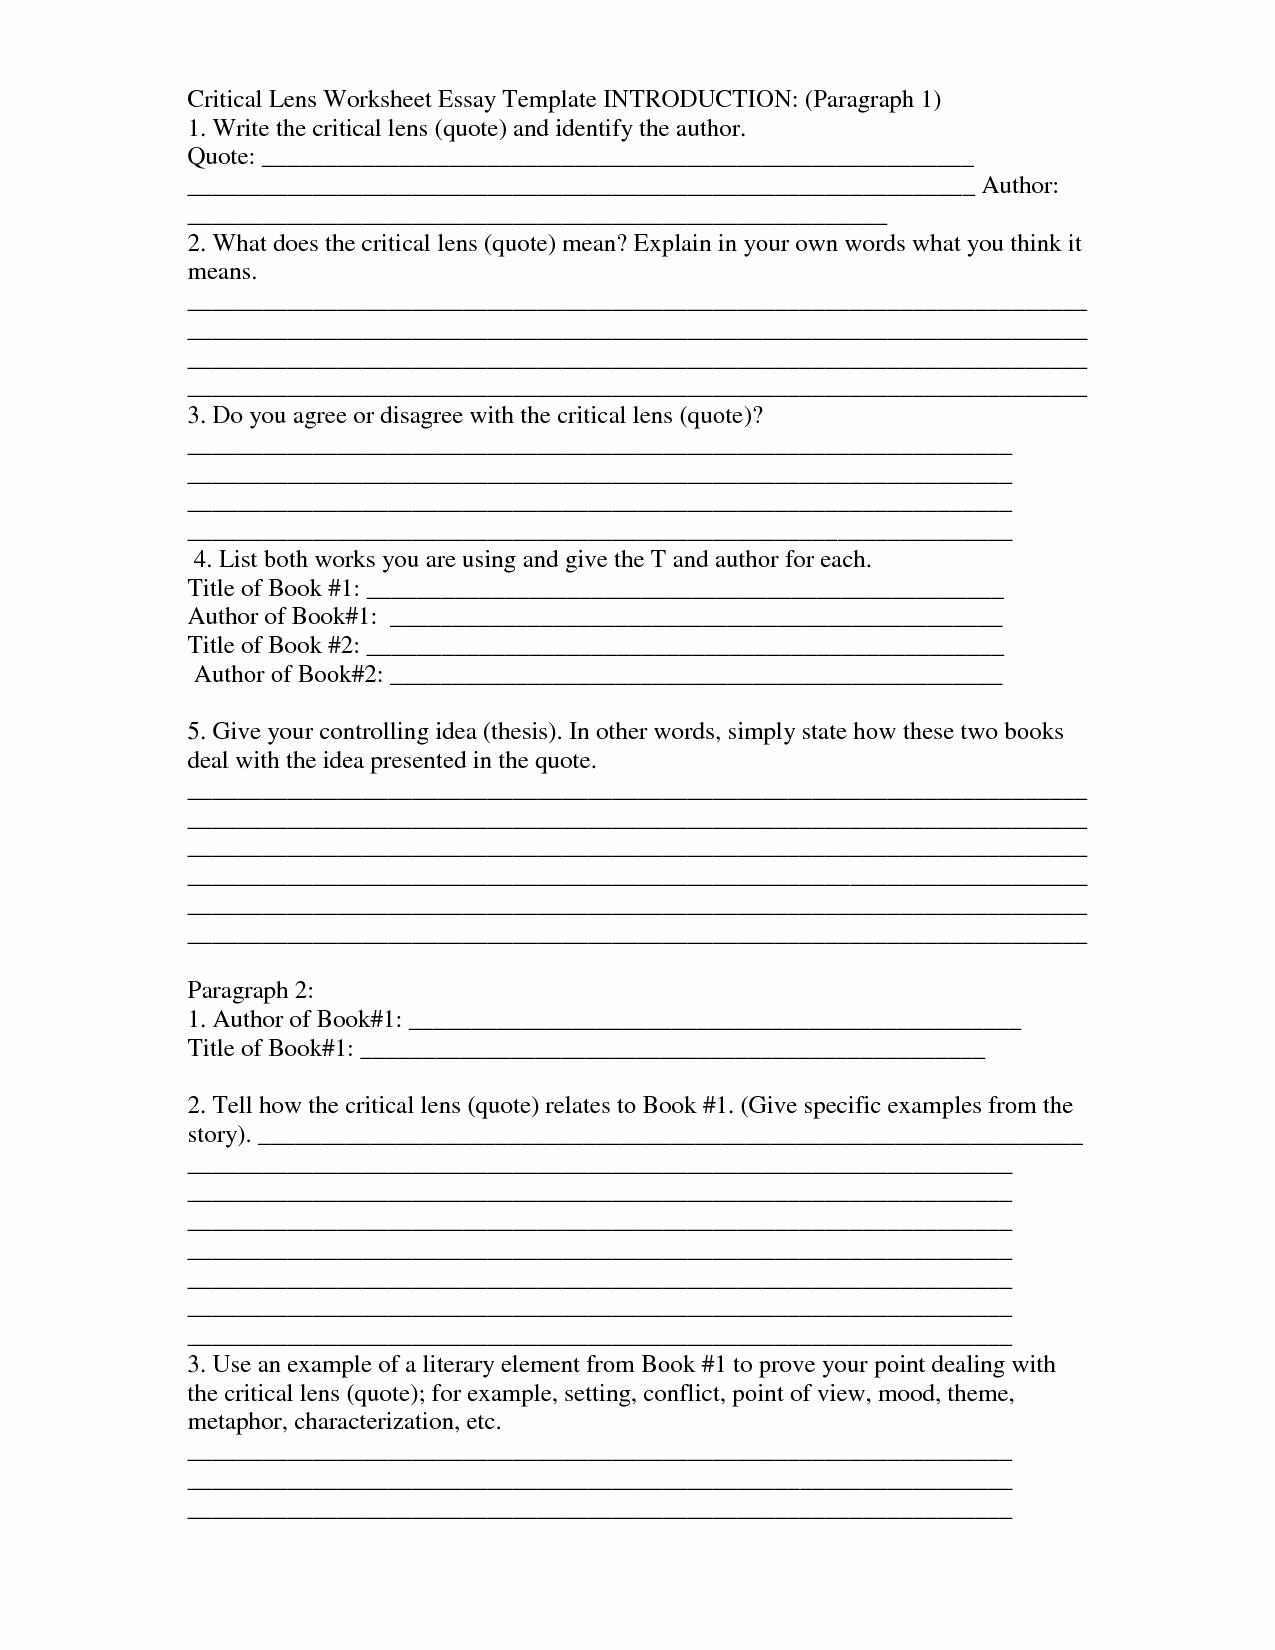 Writing A thesis Statement Worksheet Unique Critical Lens Worksheet Essay Template Introduction